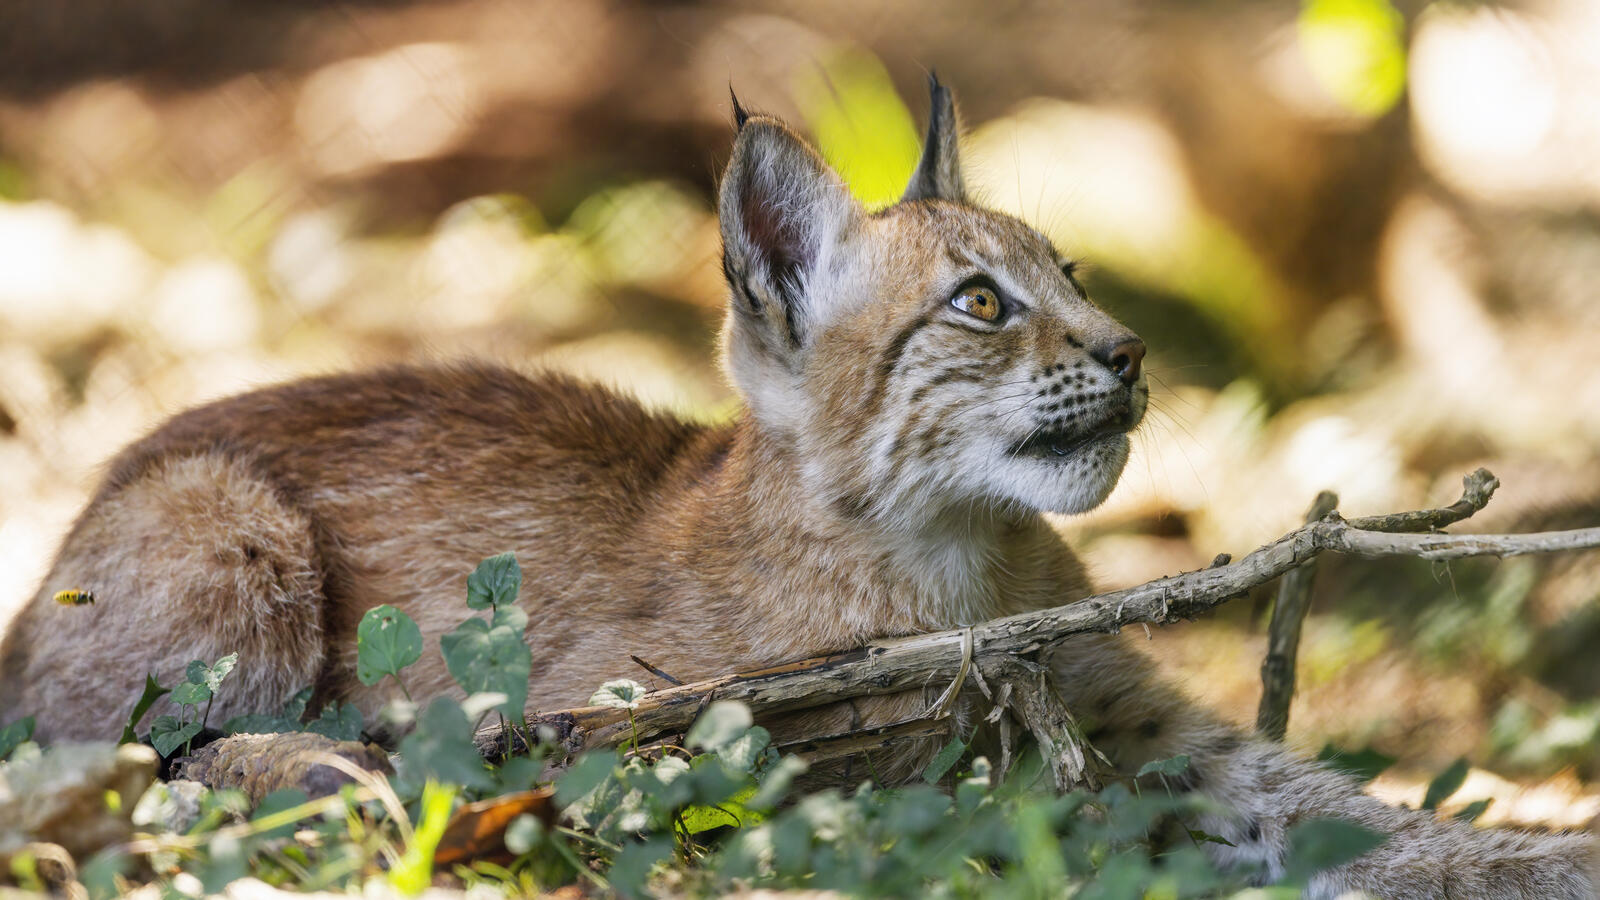 Free photo The little lynx looks up in the blurry background